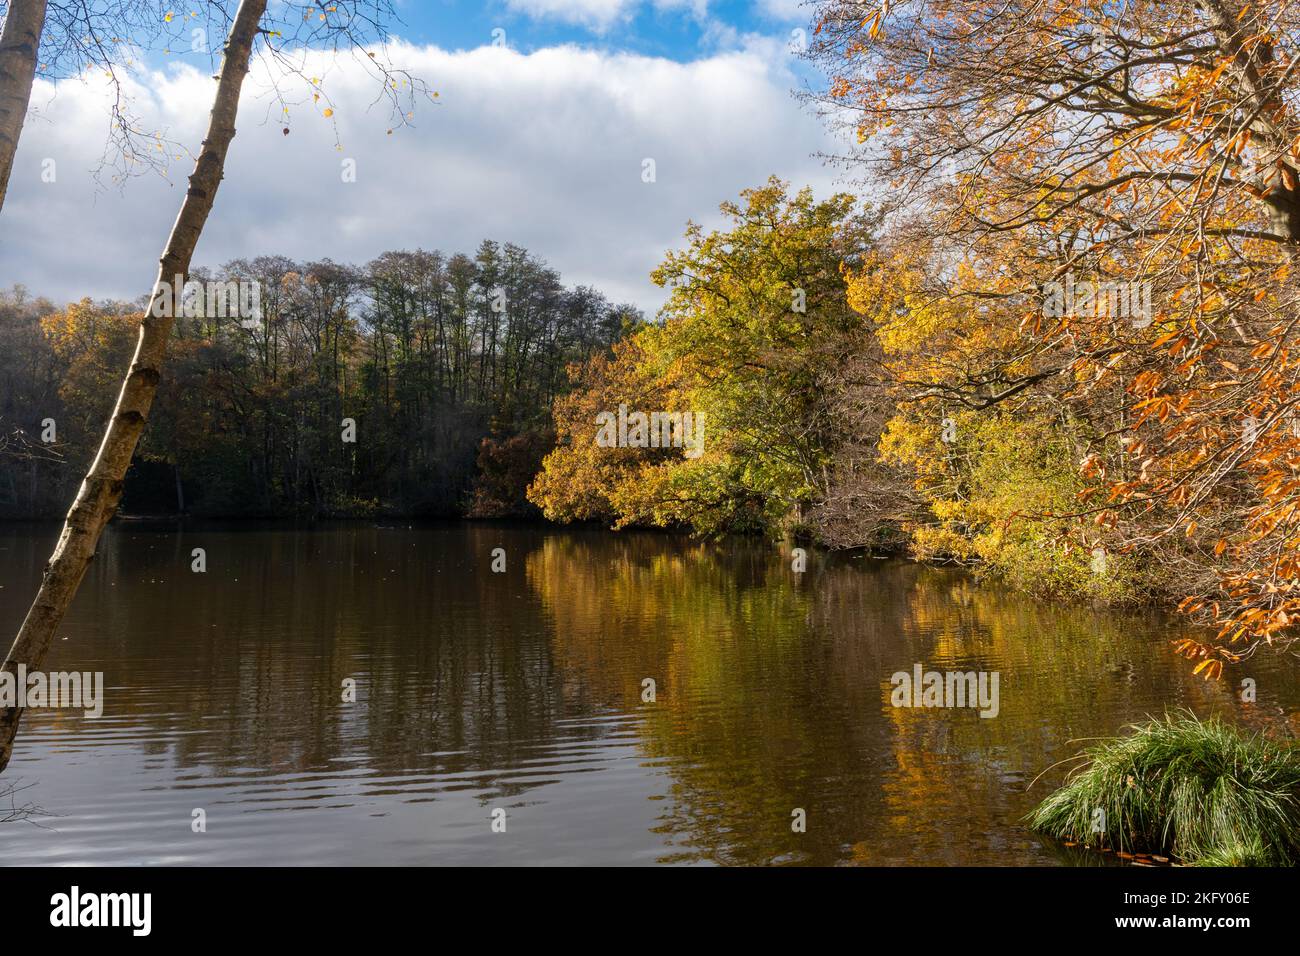 The Tarn, a lake beside Puttenham Common, Surrey, England, UK, on a sunny autumn day with colourful trees and blue sky Stock Photo